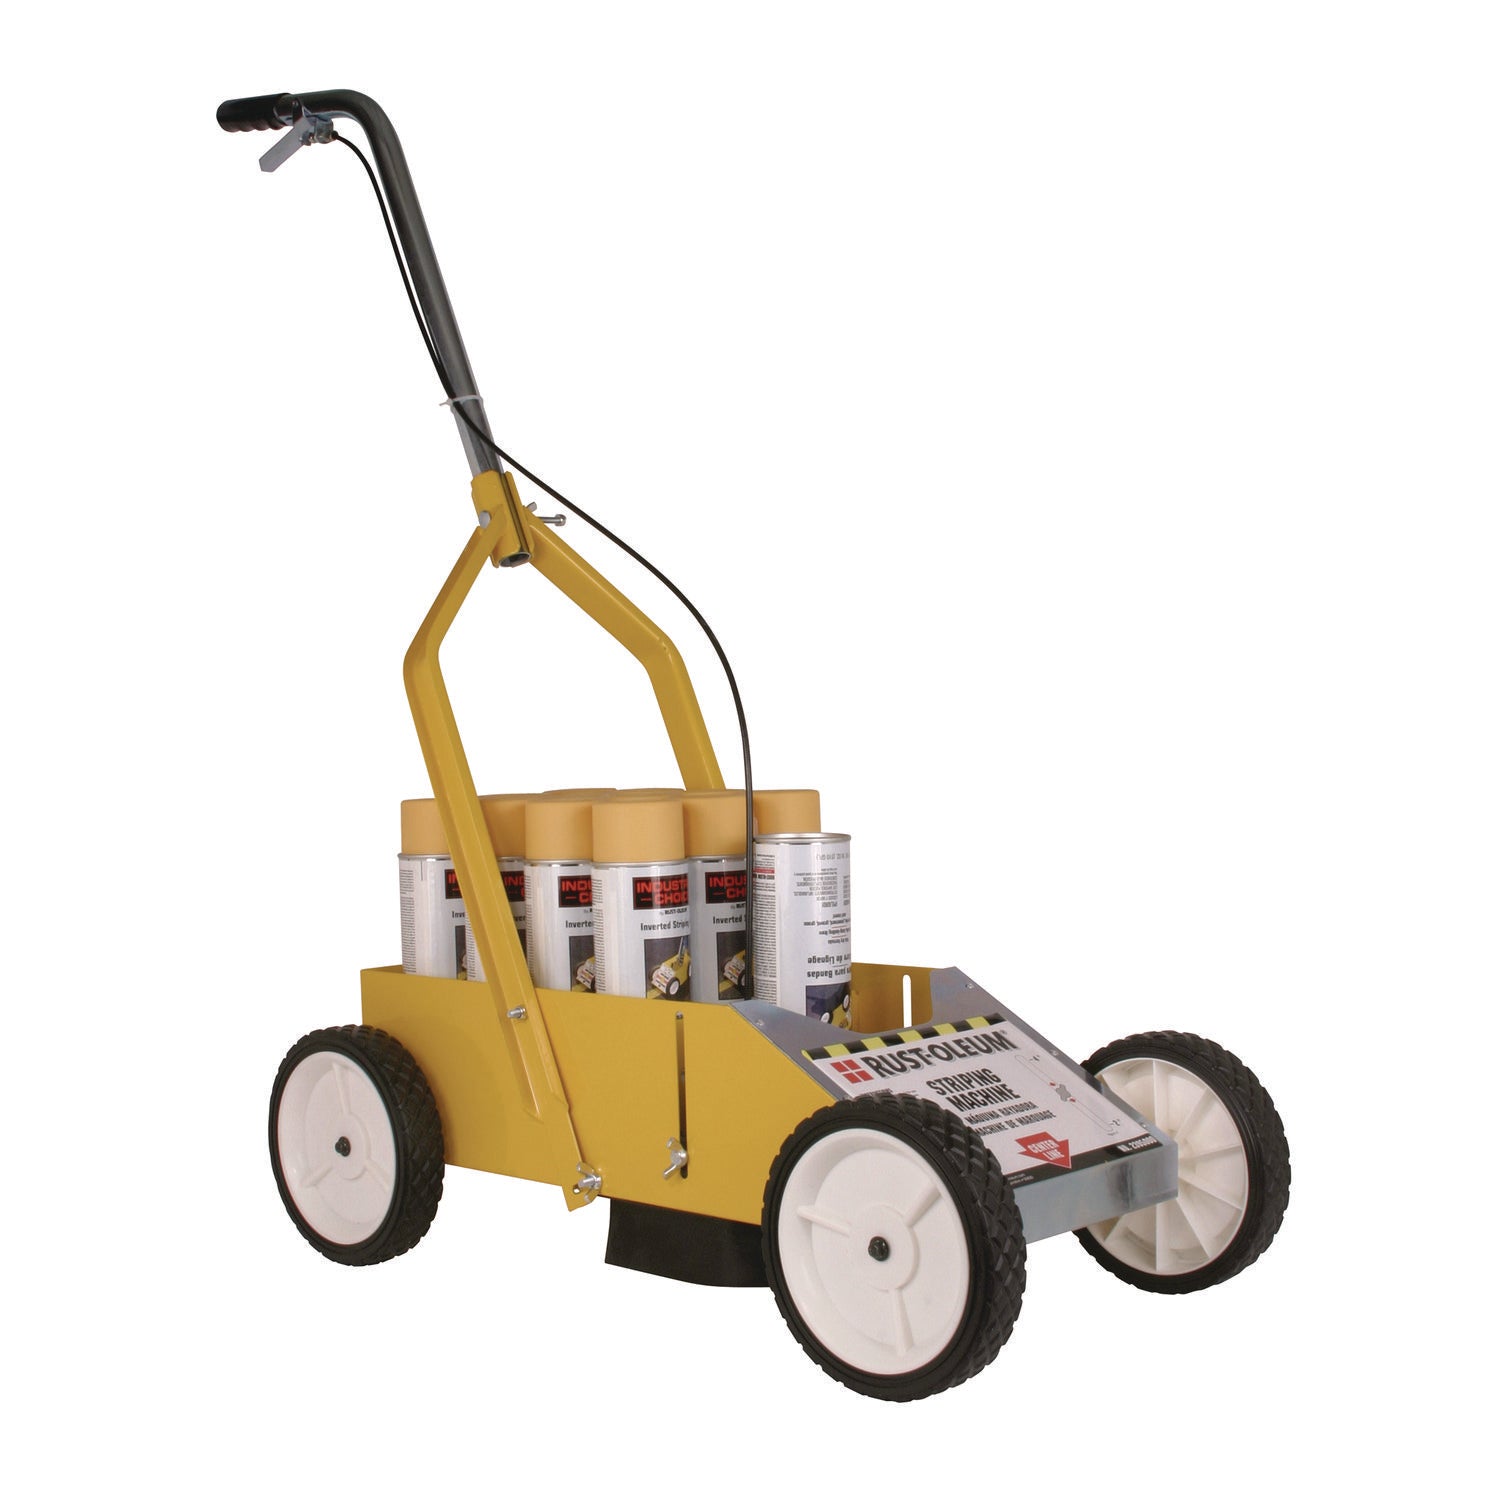 Rust-Oleum® Professional Striping Machine, Accommodates Up to 13 Standard Inverted Striping Paint Spray Cans, Yellow